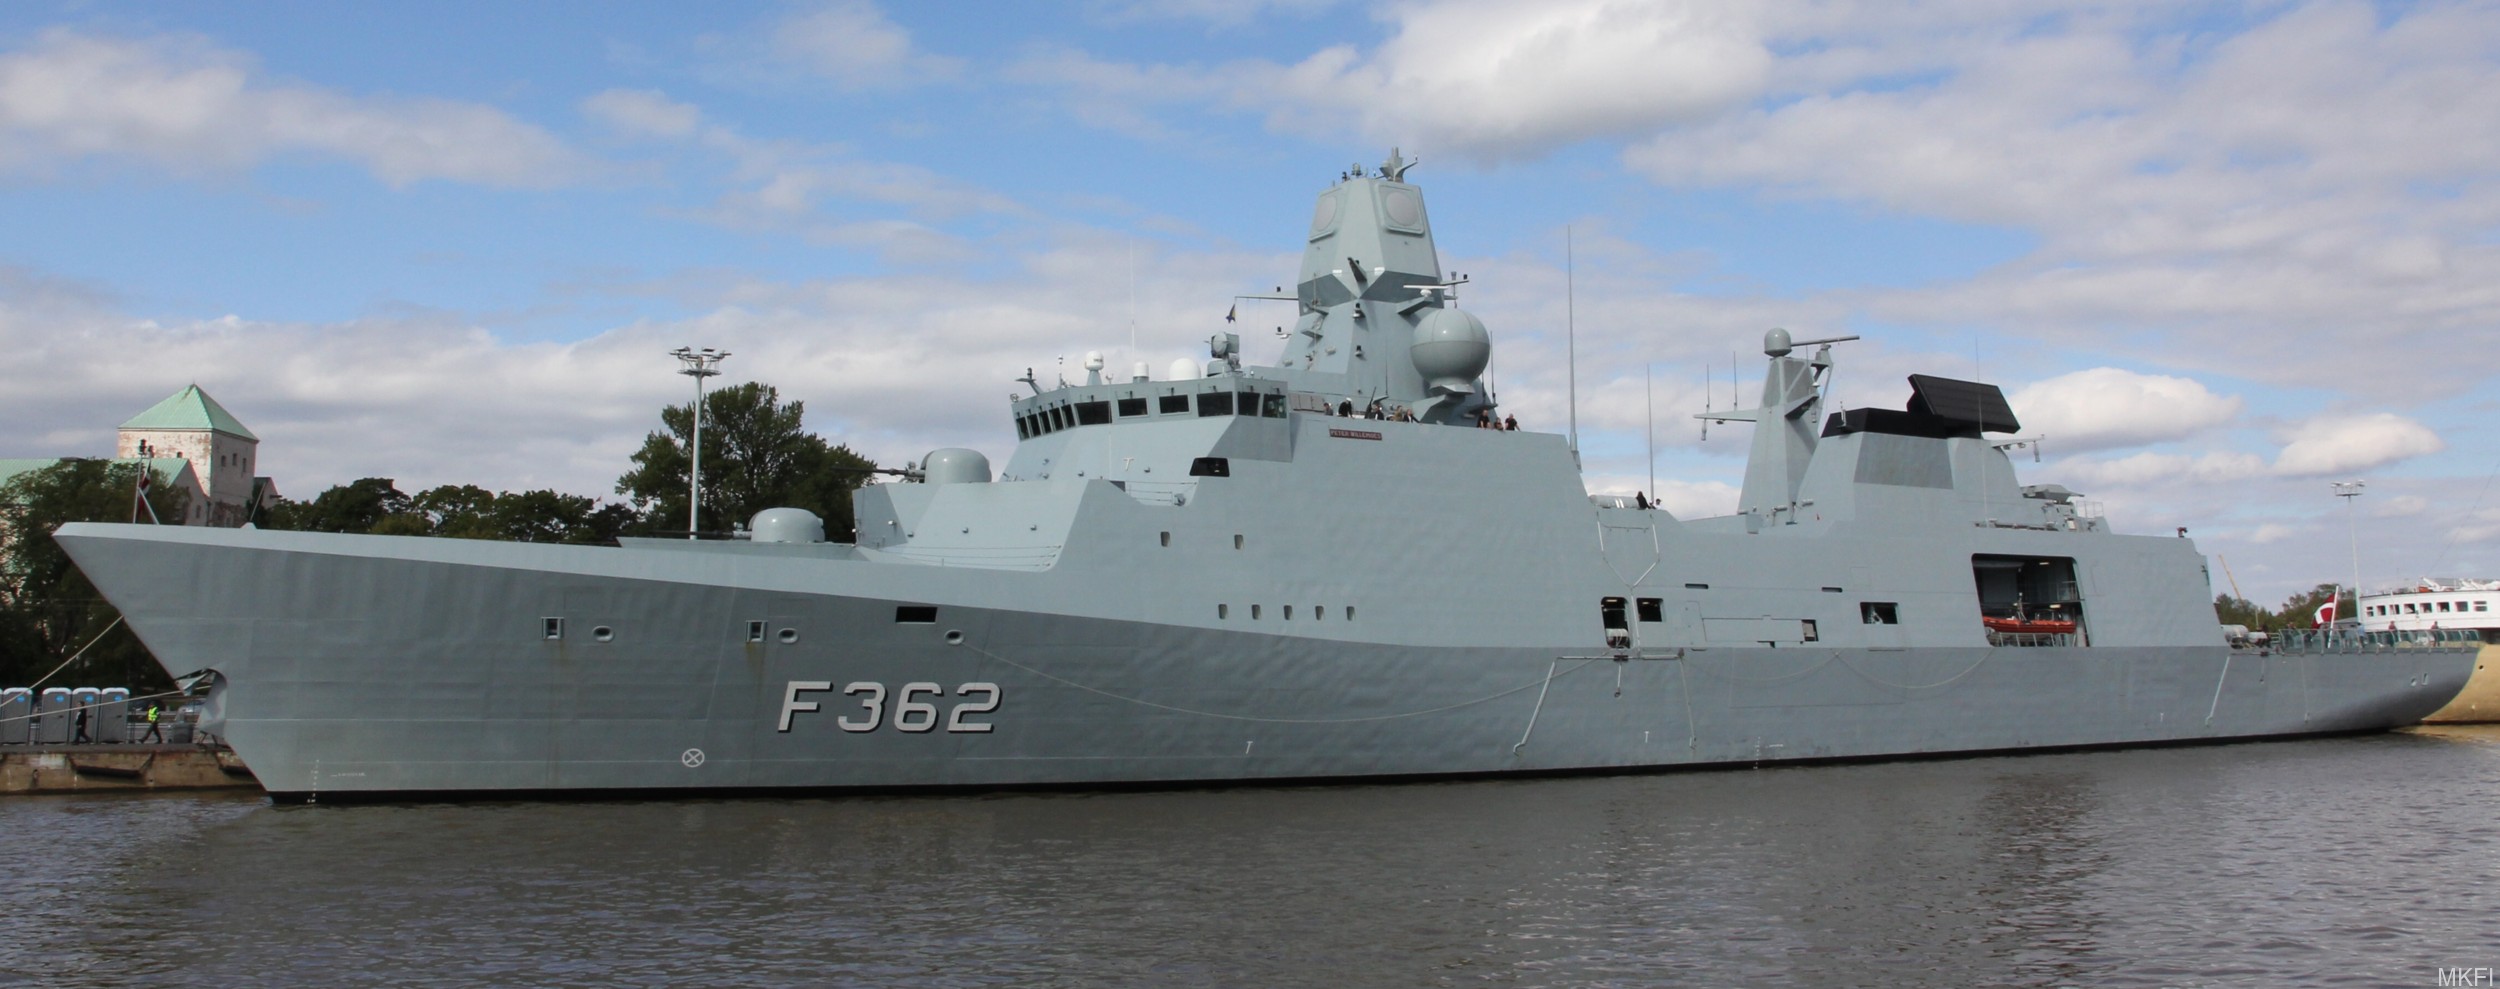 f-362 hdms peter willemoes iver huitfeldt class guided missile frigate ffg royal danish navy 02